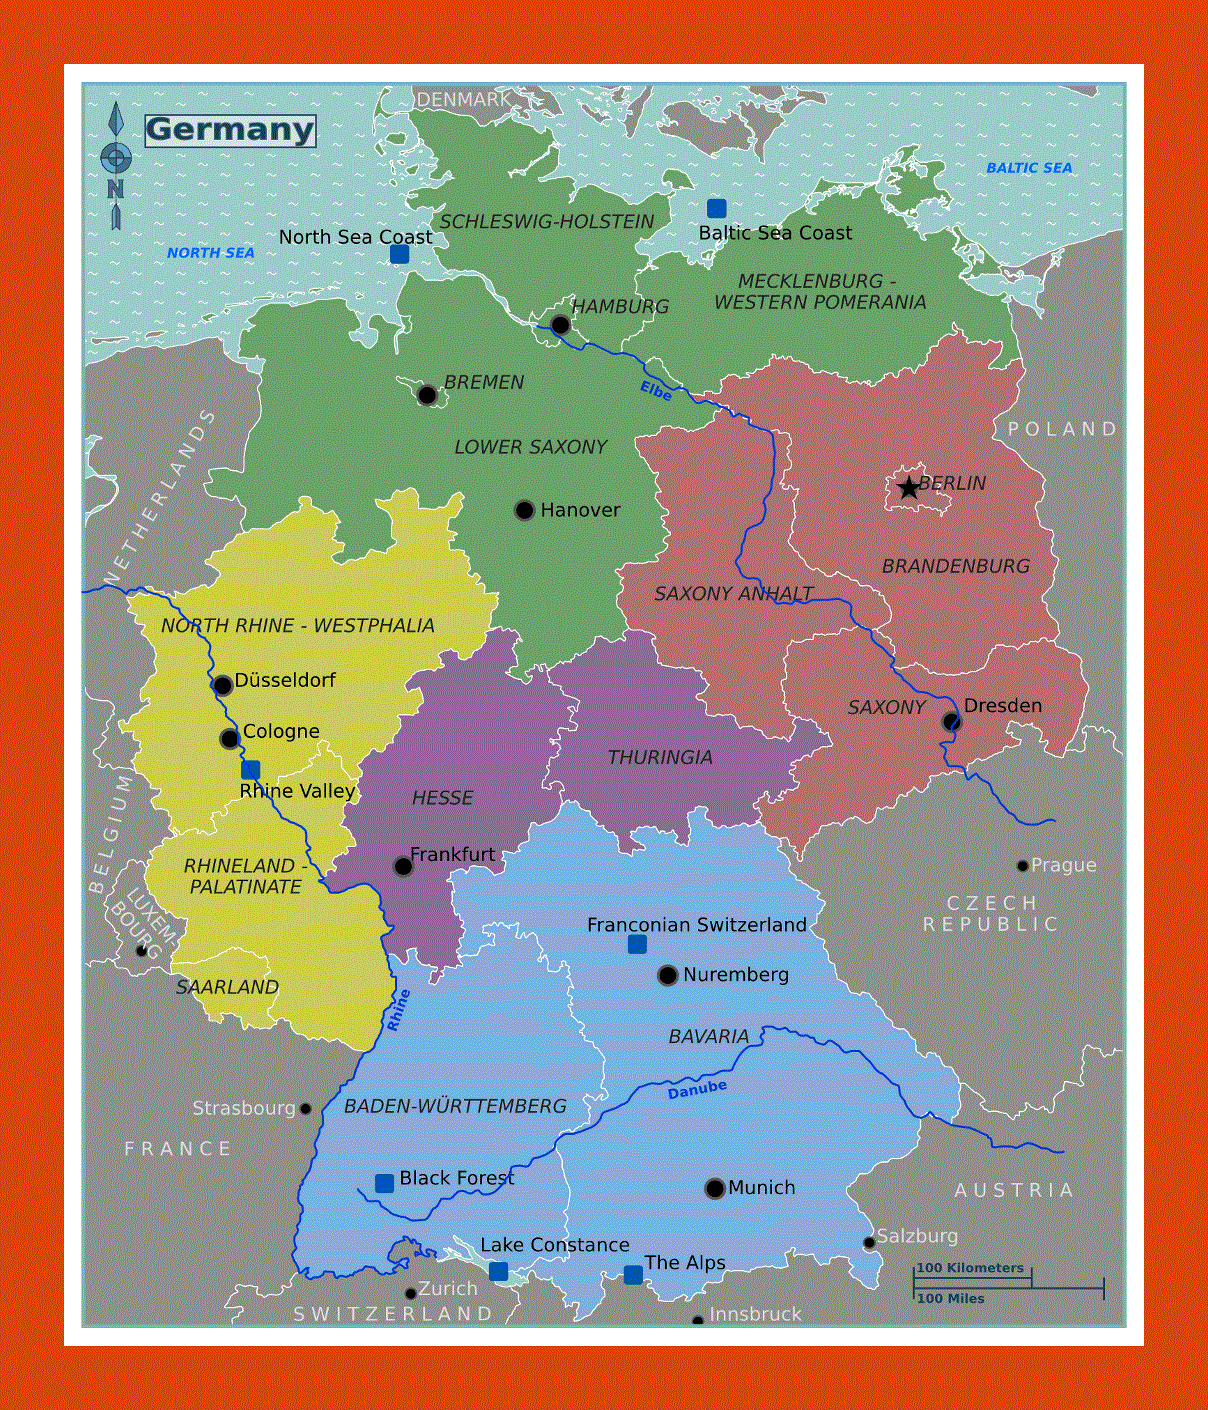 Regions map of Germany